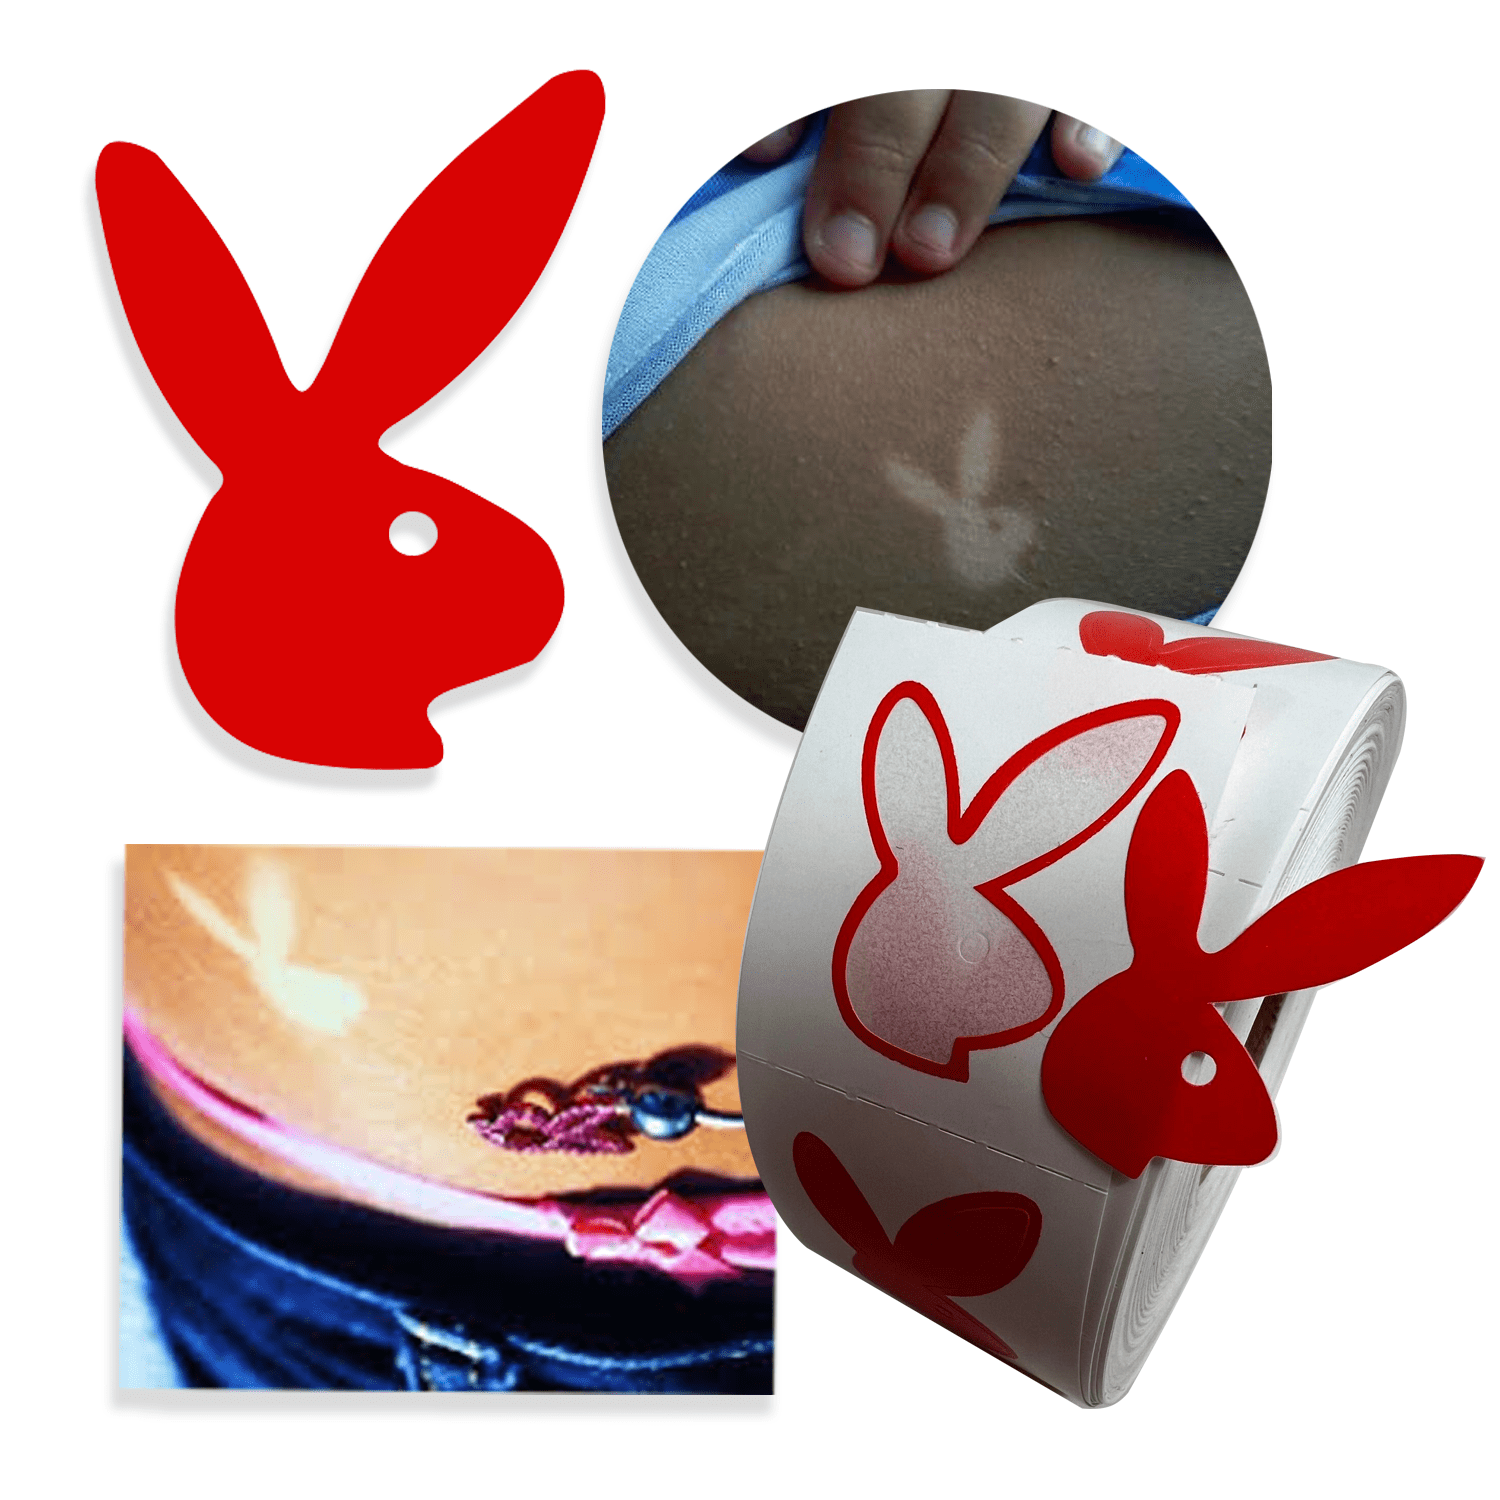 Bunny Spray Tanning Stickers Spray Tan Mobile Airbrush Tanning Decals Tanning Bed Outdoors Anywhere